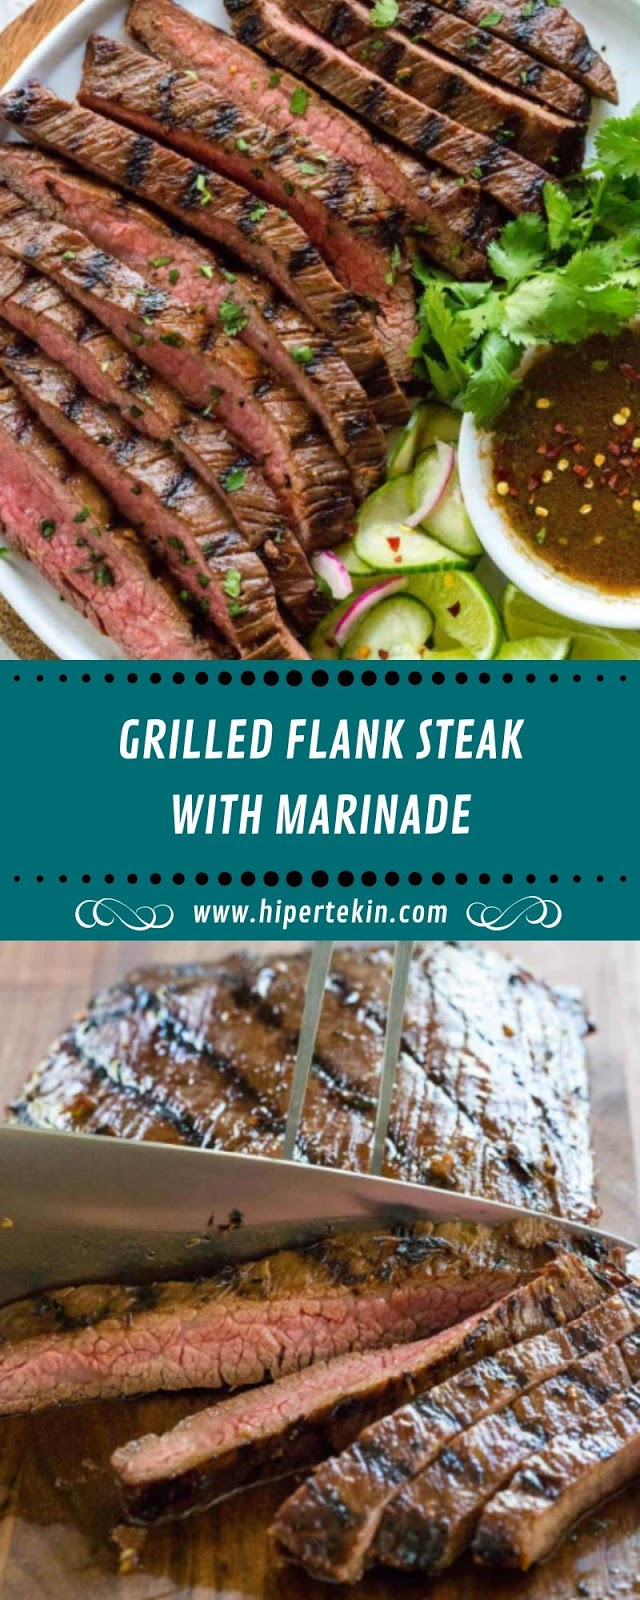 GRILLED FLANK STEAK WITH MARINADE